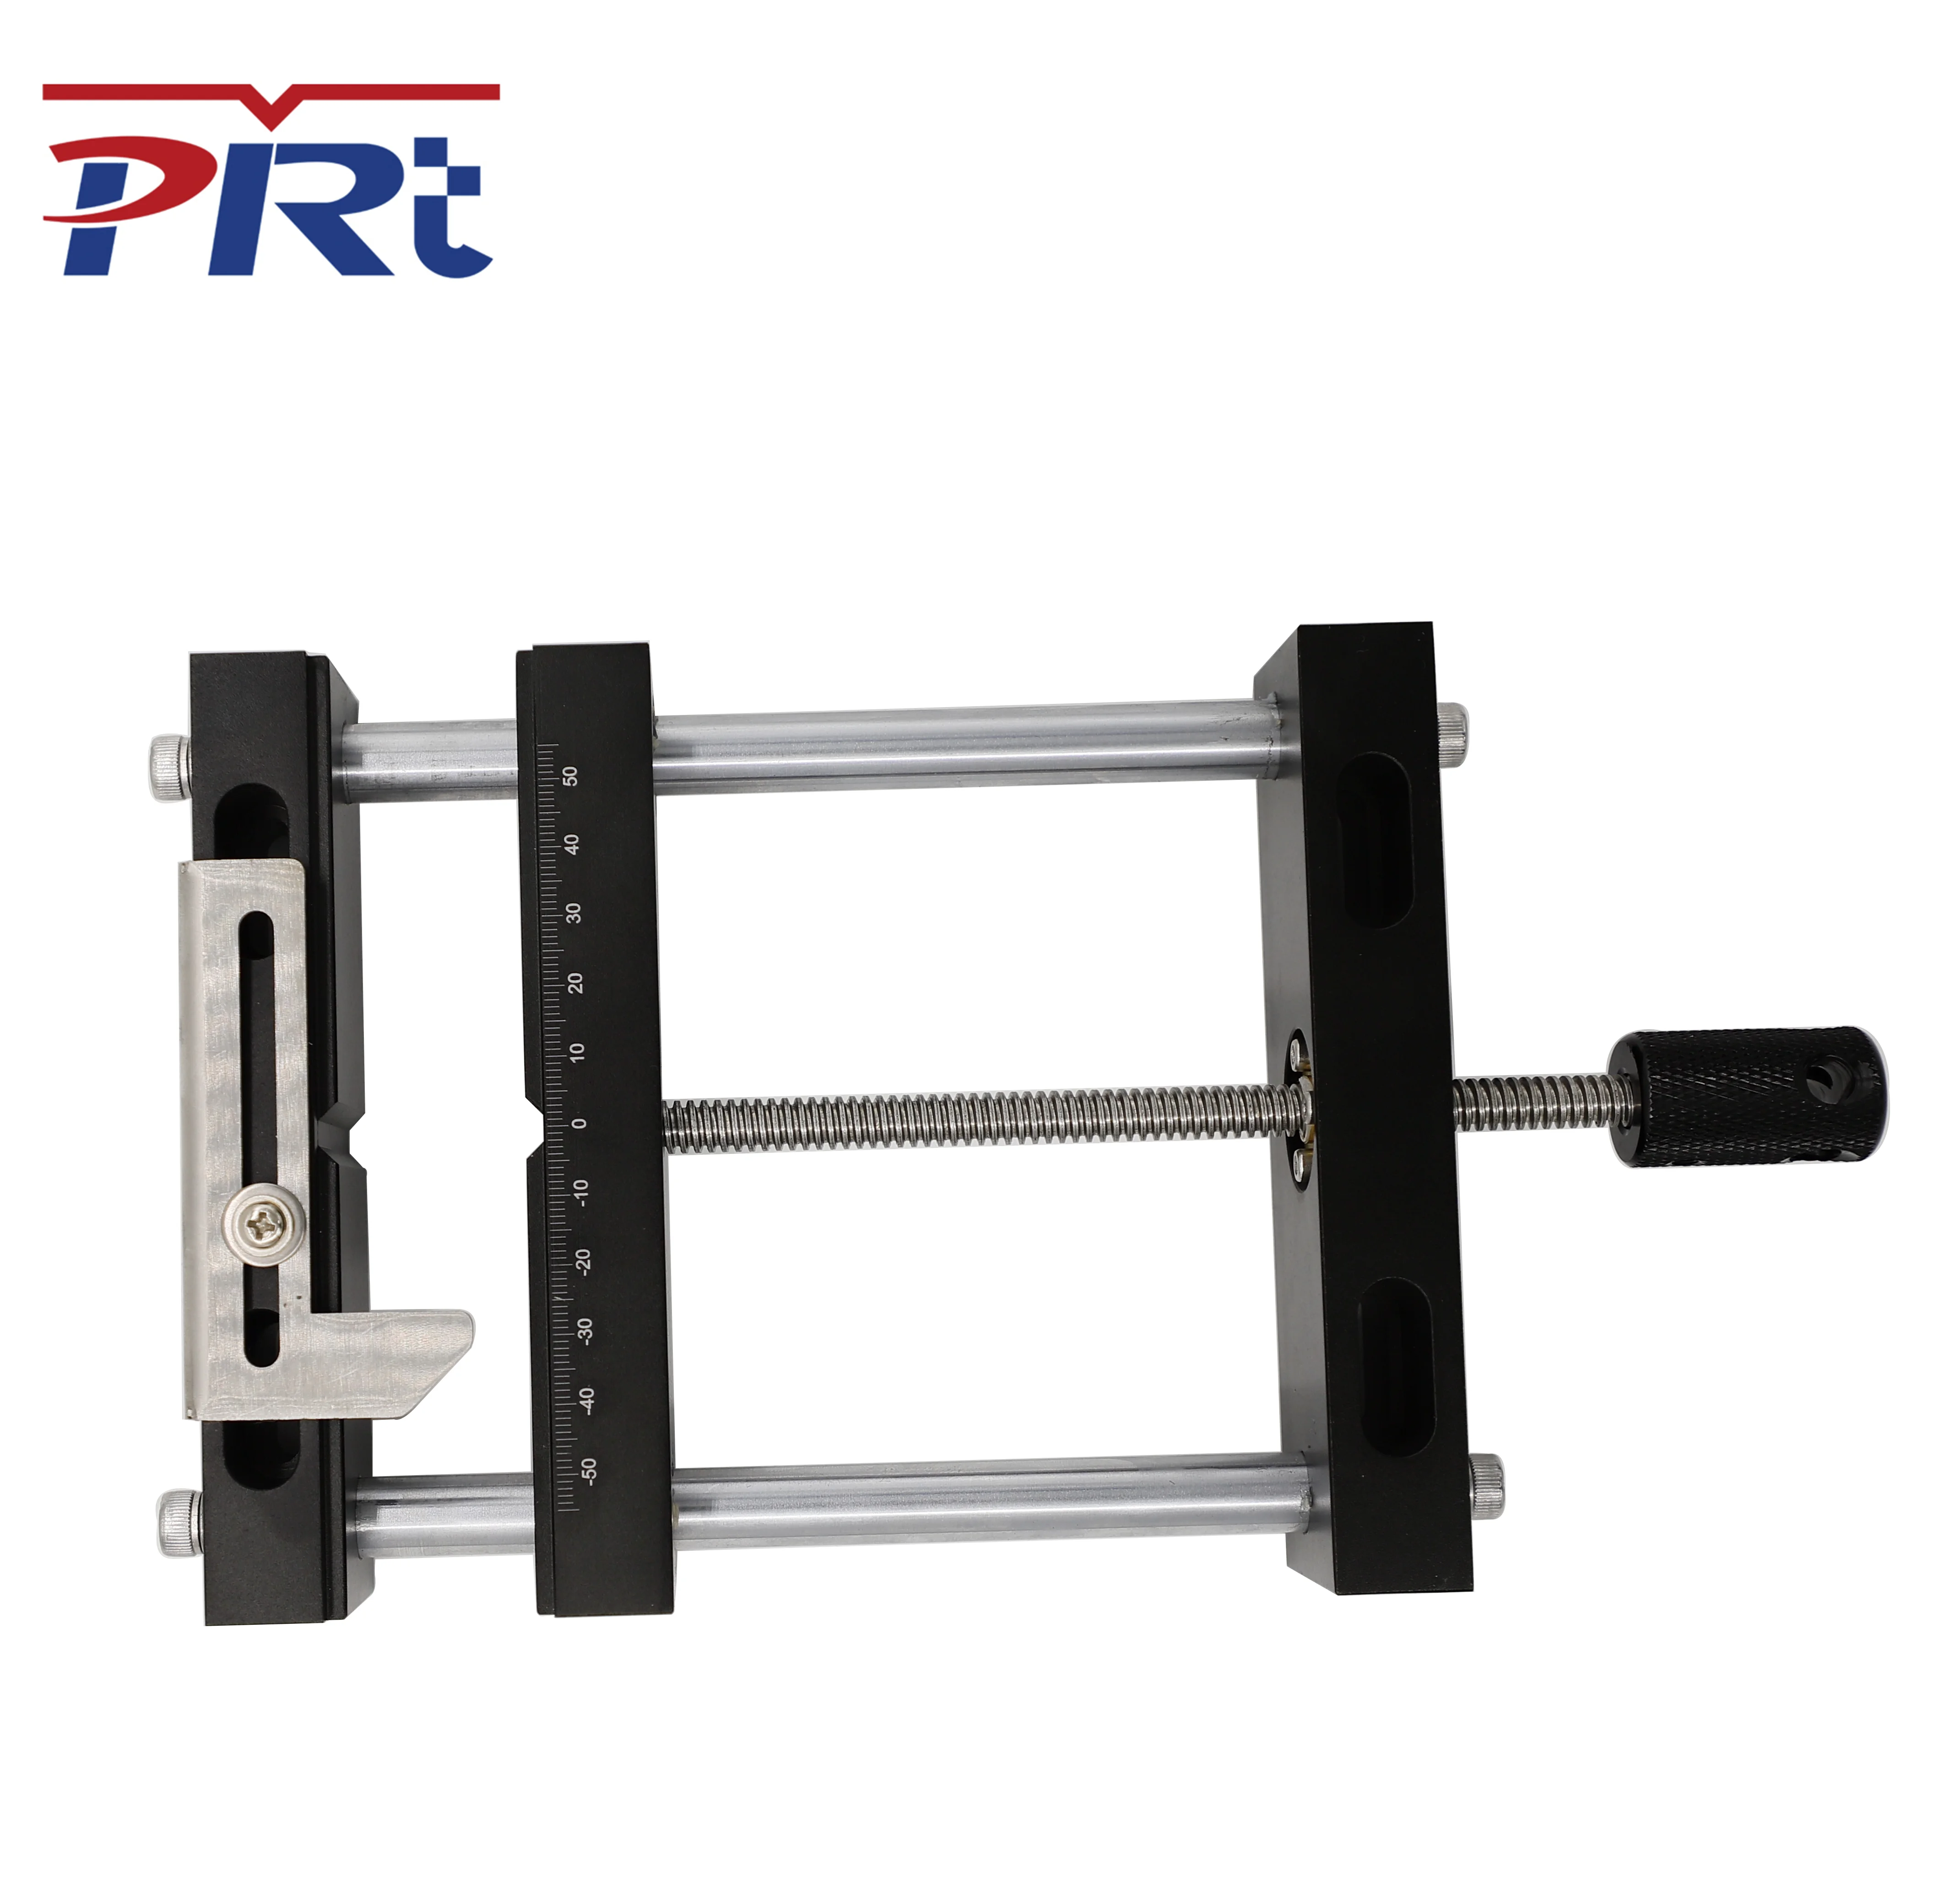 PRTCNC CNC Router Tools Bench Clamp Multi-function, Aluminum Structure and High Precision Vise